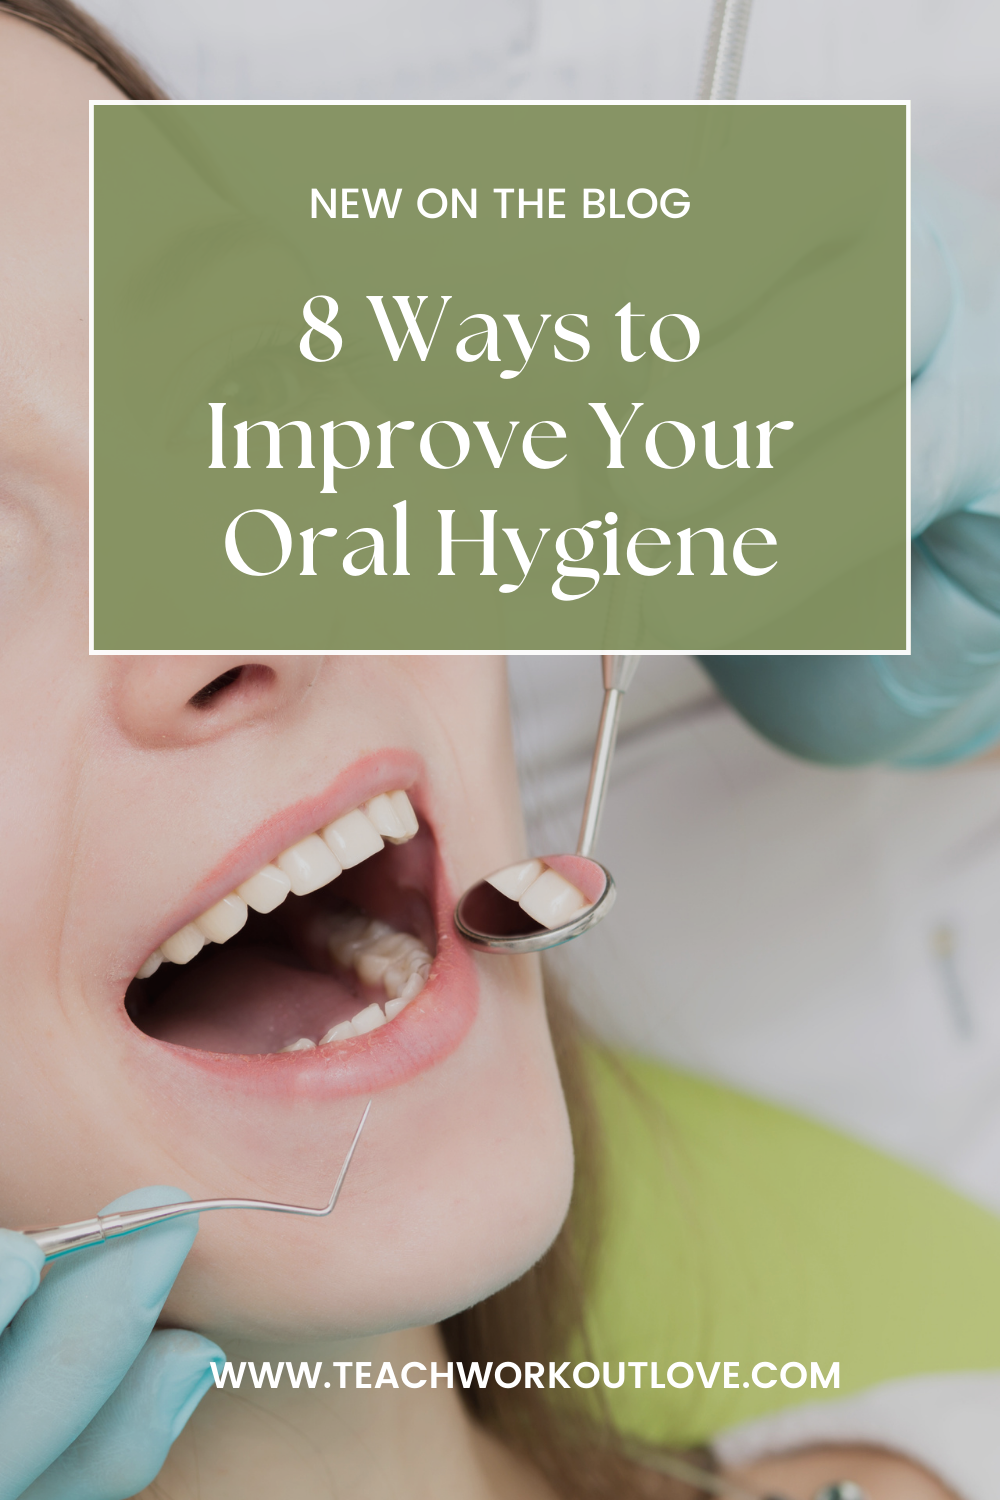 From easy-to-follow tips to accessible dental care strategies, let's delve into enhancing your oral health for a healthier lifestyle.